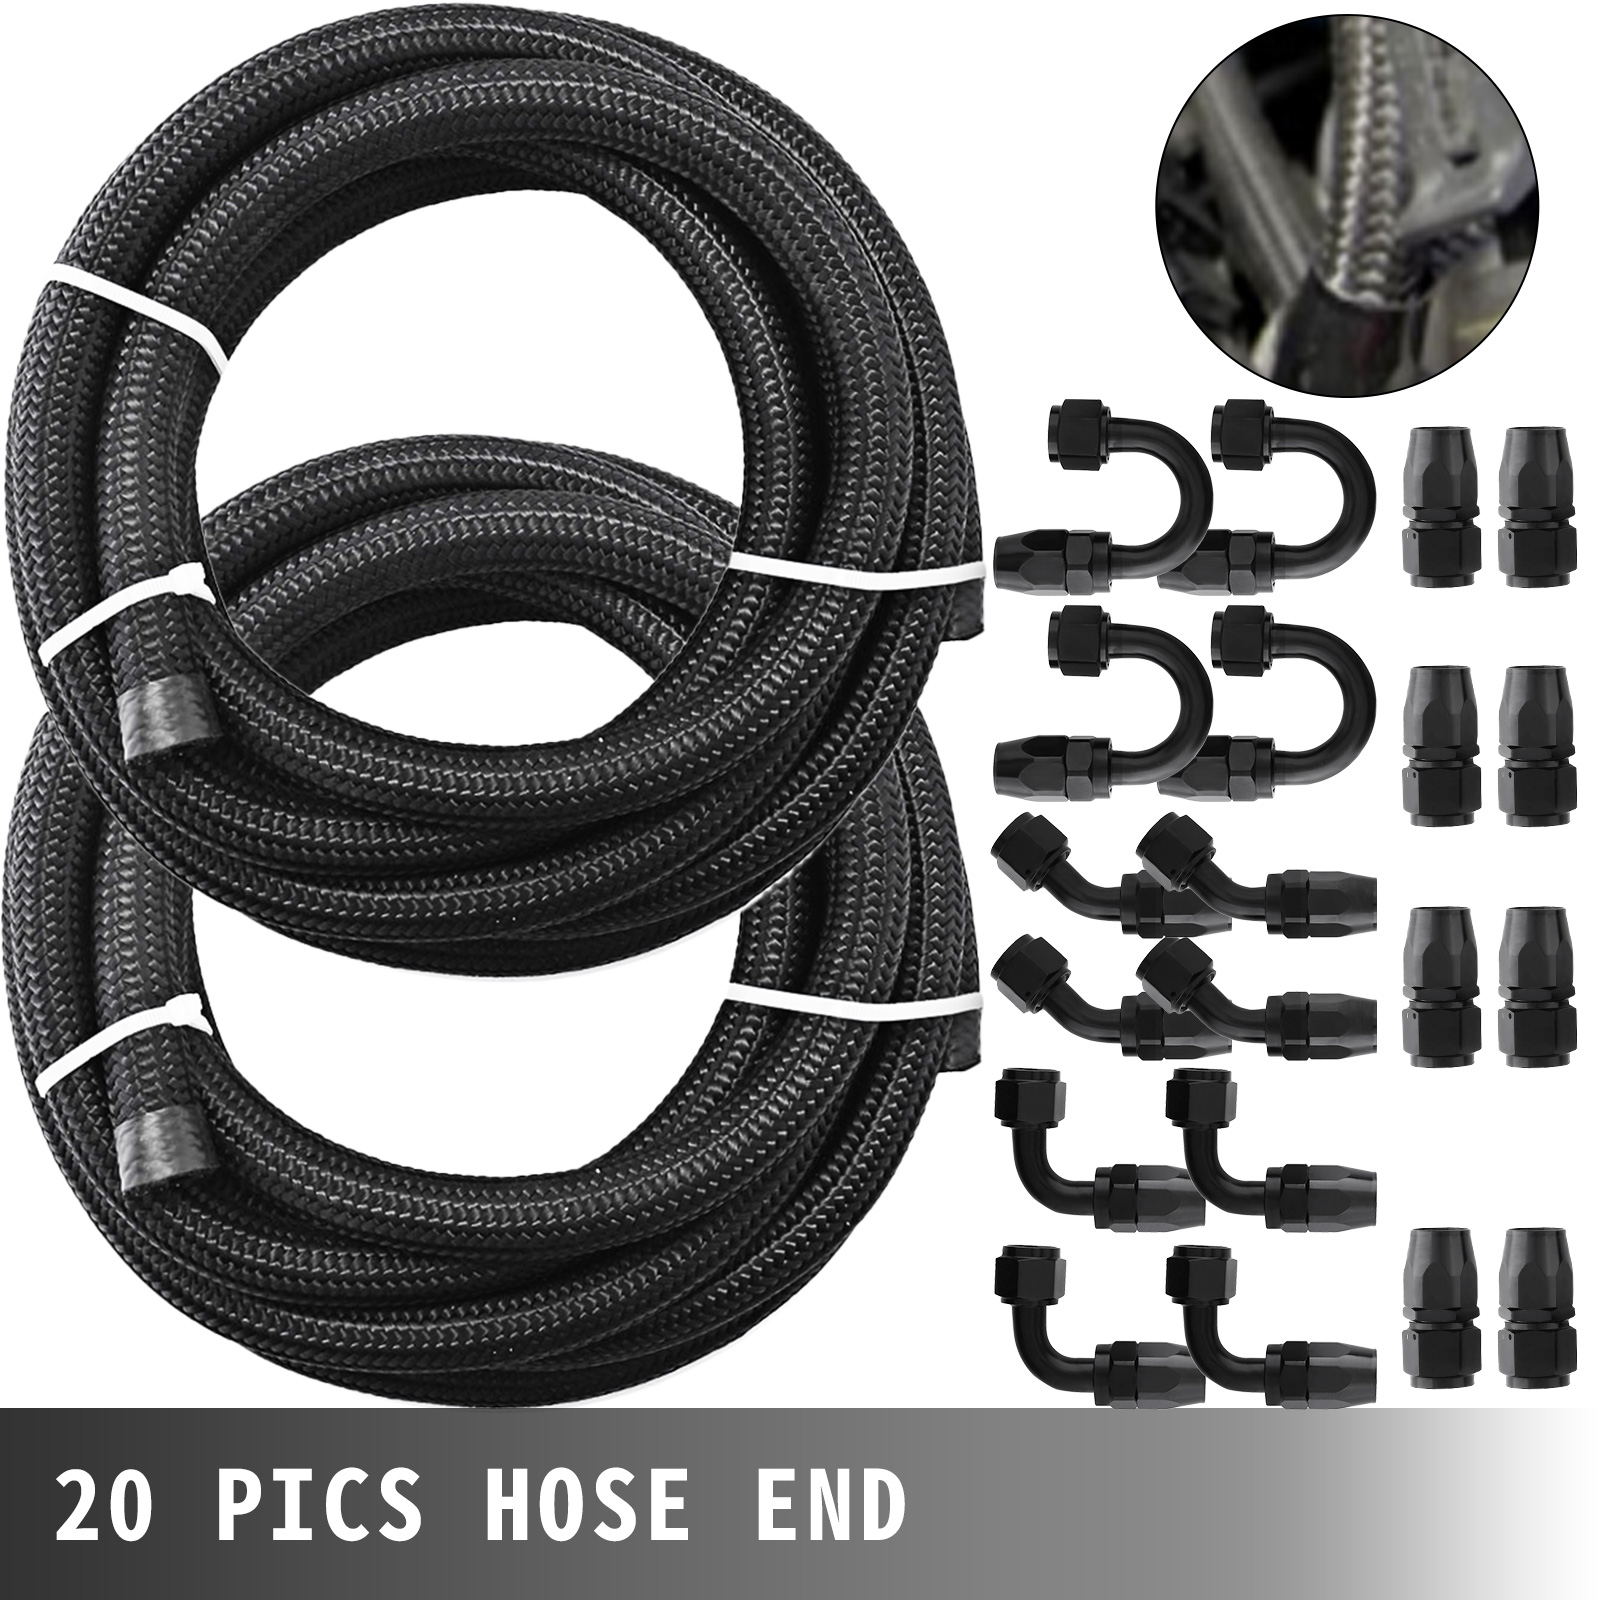 12Ft 6AN 3/8 Fuel Line Hose Braided Stainless Steel,With 6PCS AN6 Swivel  Hose Ends and 2PCS AN-10 to AN-6 Fuel Tank Fitting Adapters Kit, Blue & Red